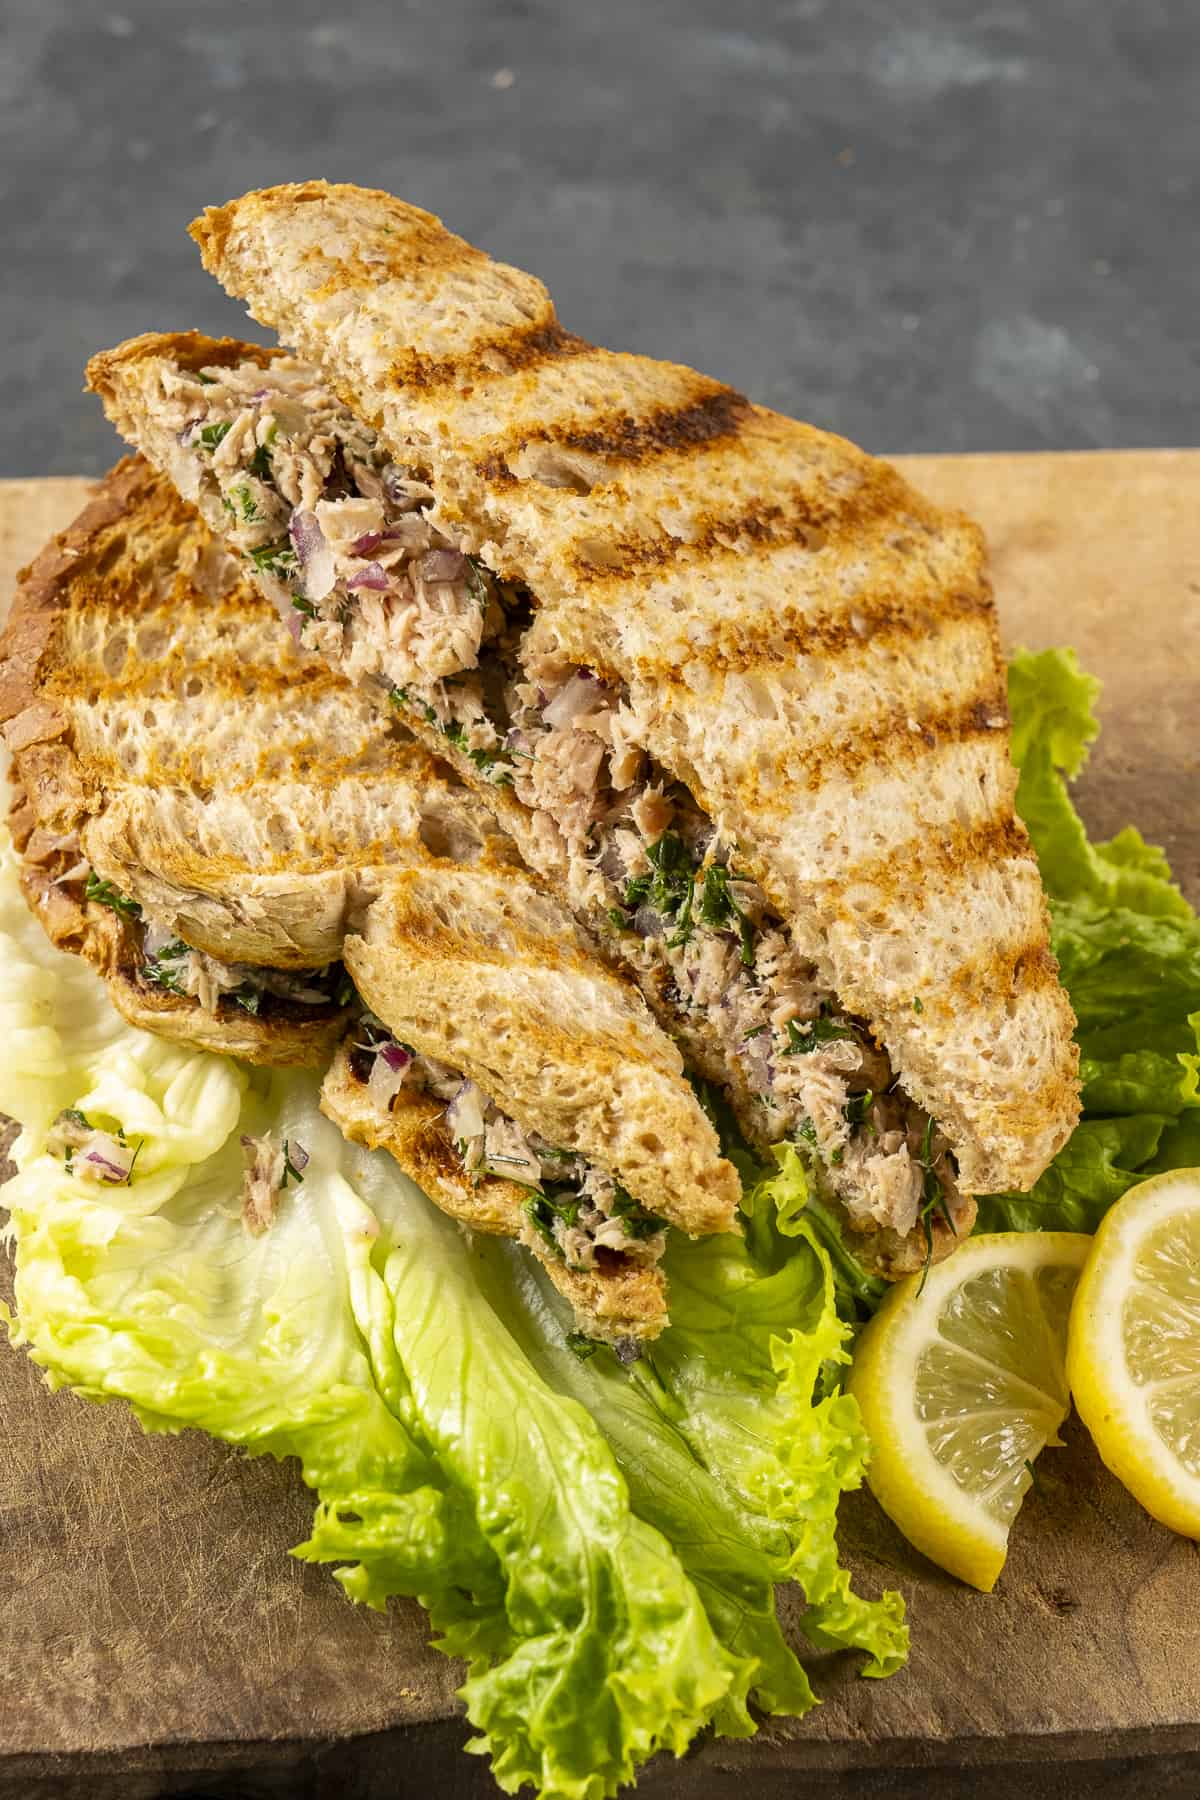 Tuna salad sandwiches accompanied by lettuce leaves and lemon wedges.